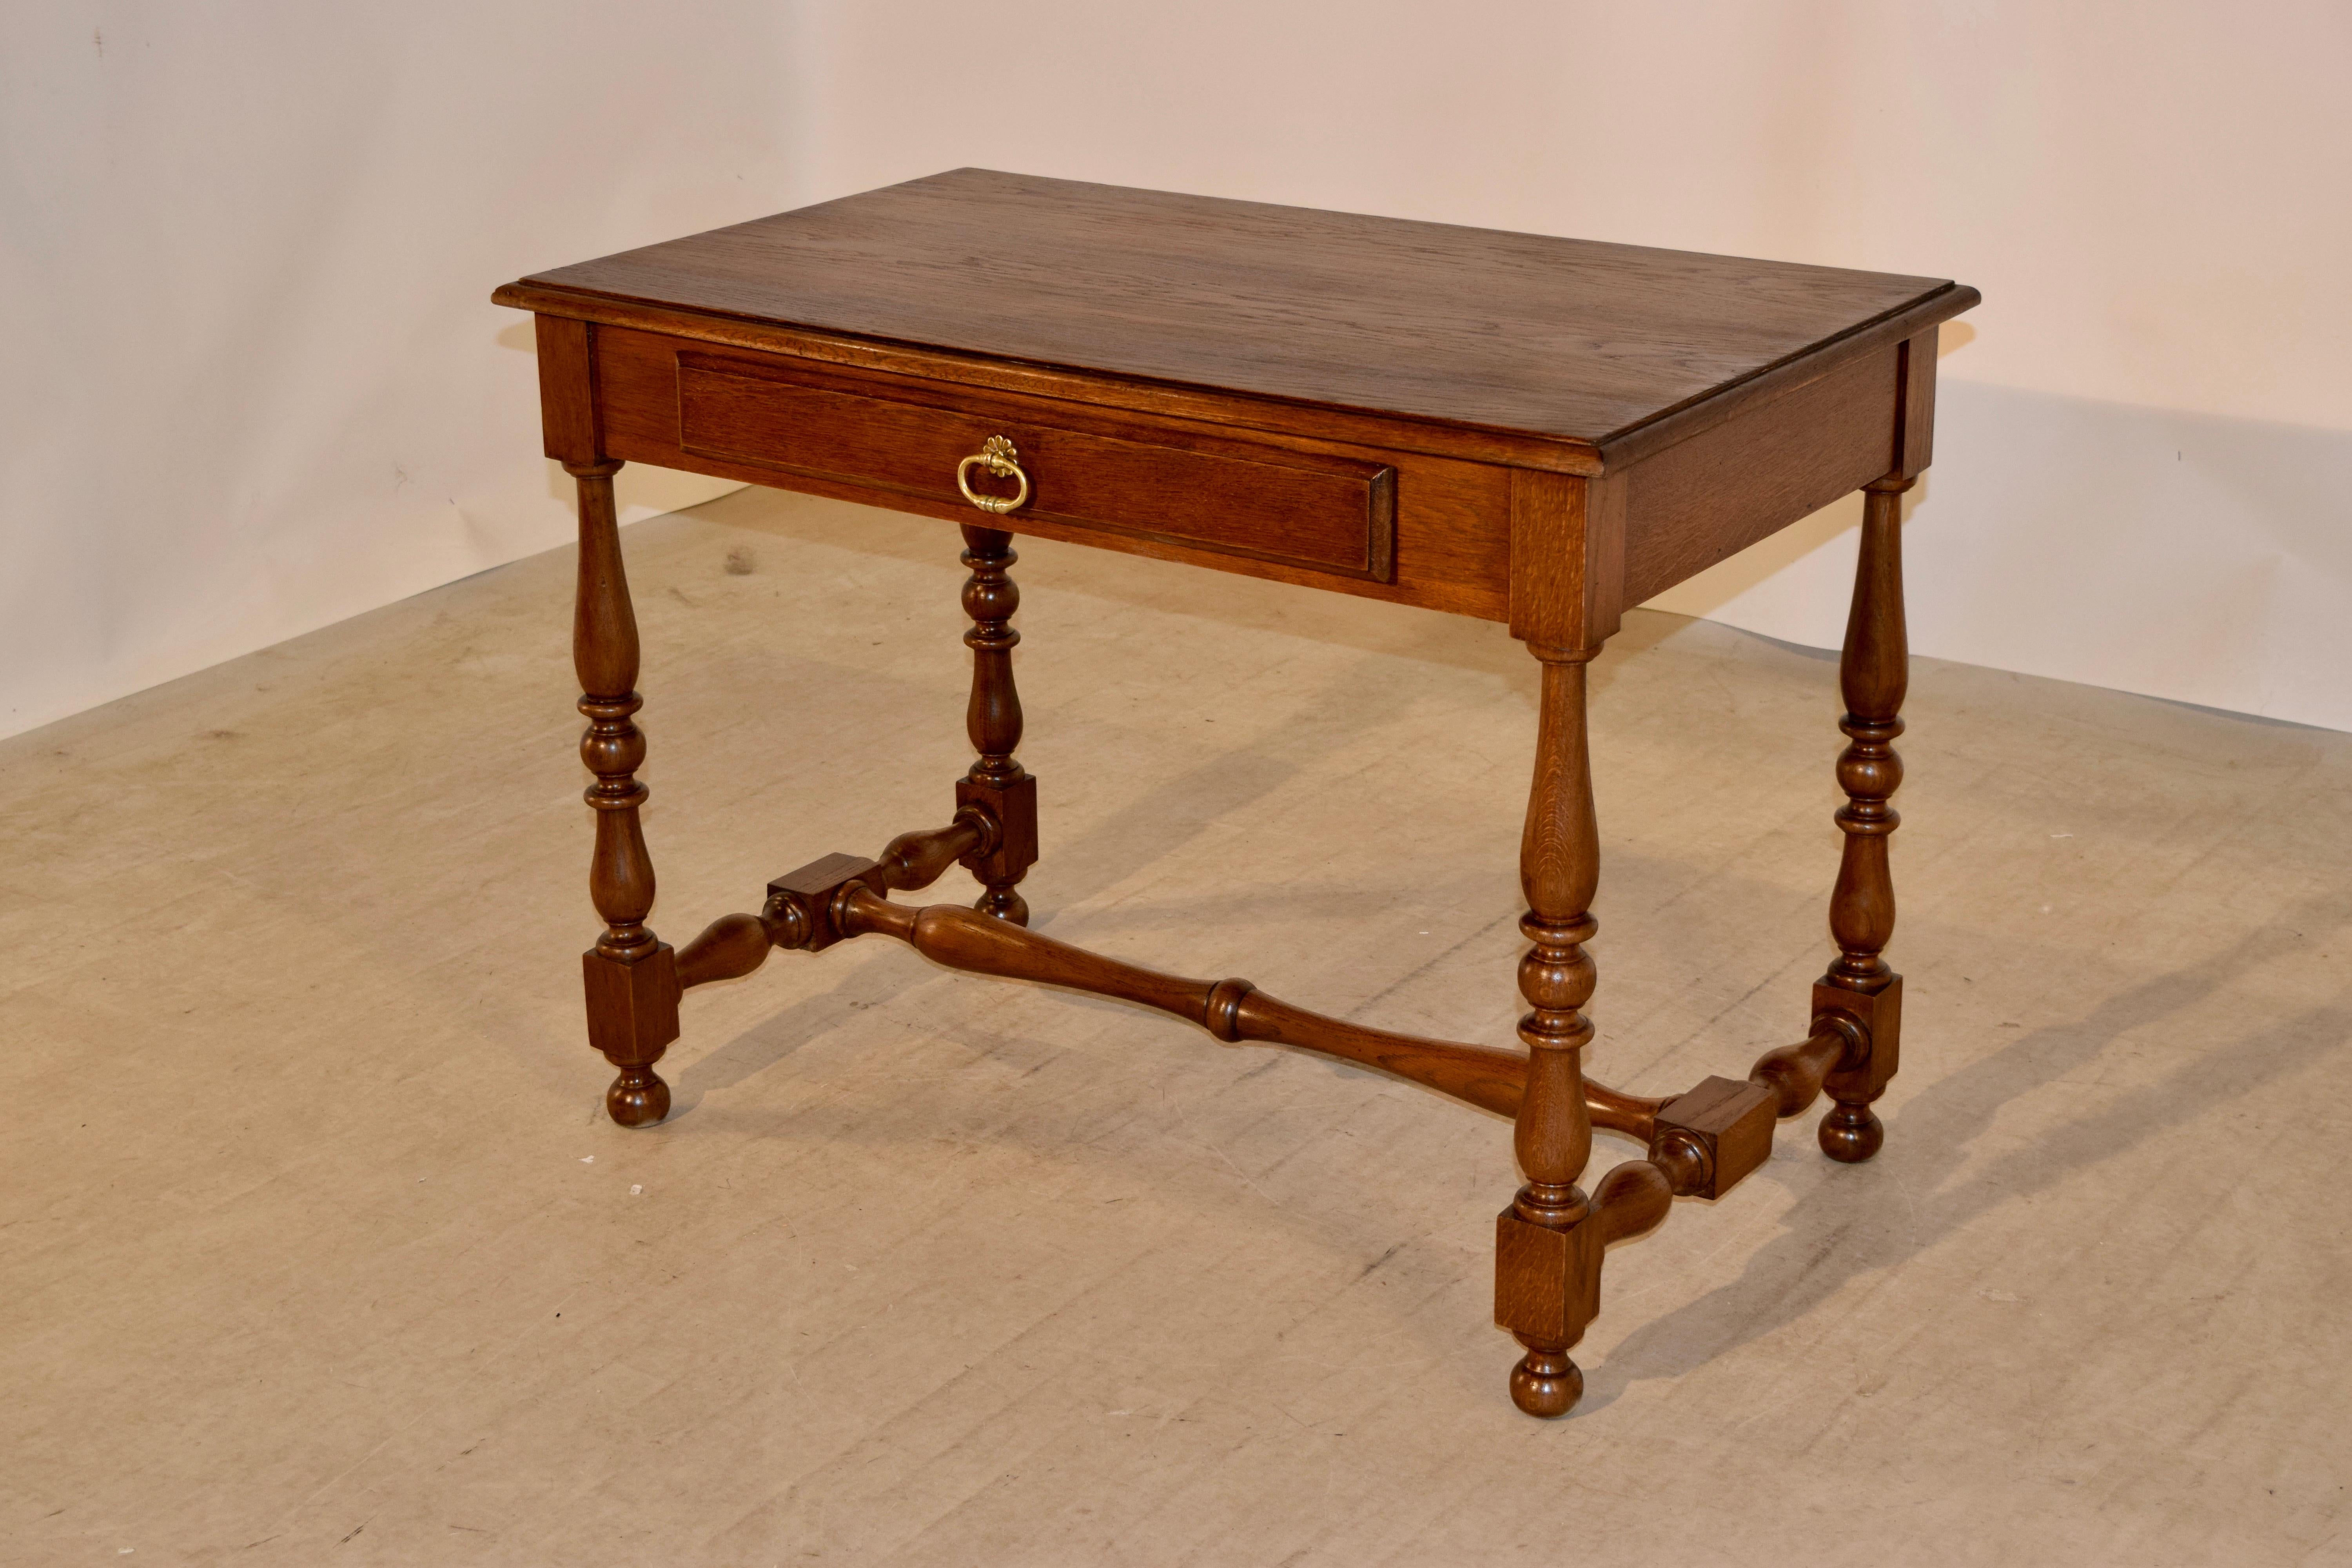 19th century oak library table from France with a bevelled edge around the top, following down to a simple apron containing a single drawer in the front. The piece is supported on hand turned legs, joined by a hand turned stretcher and raised on